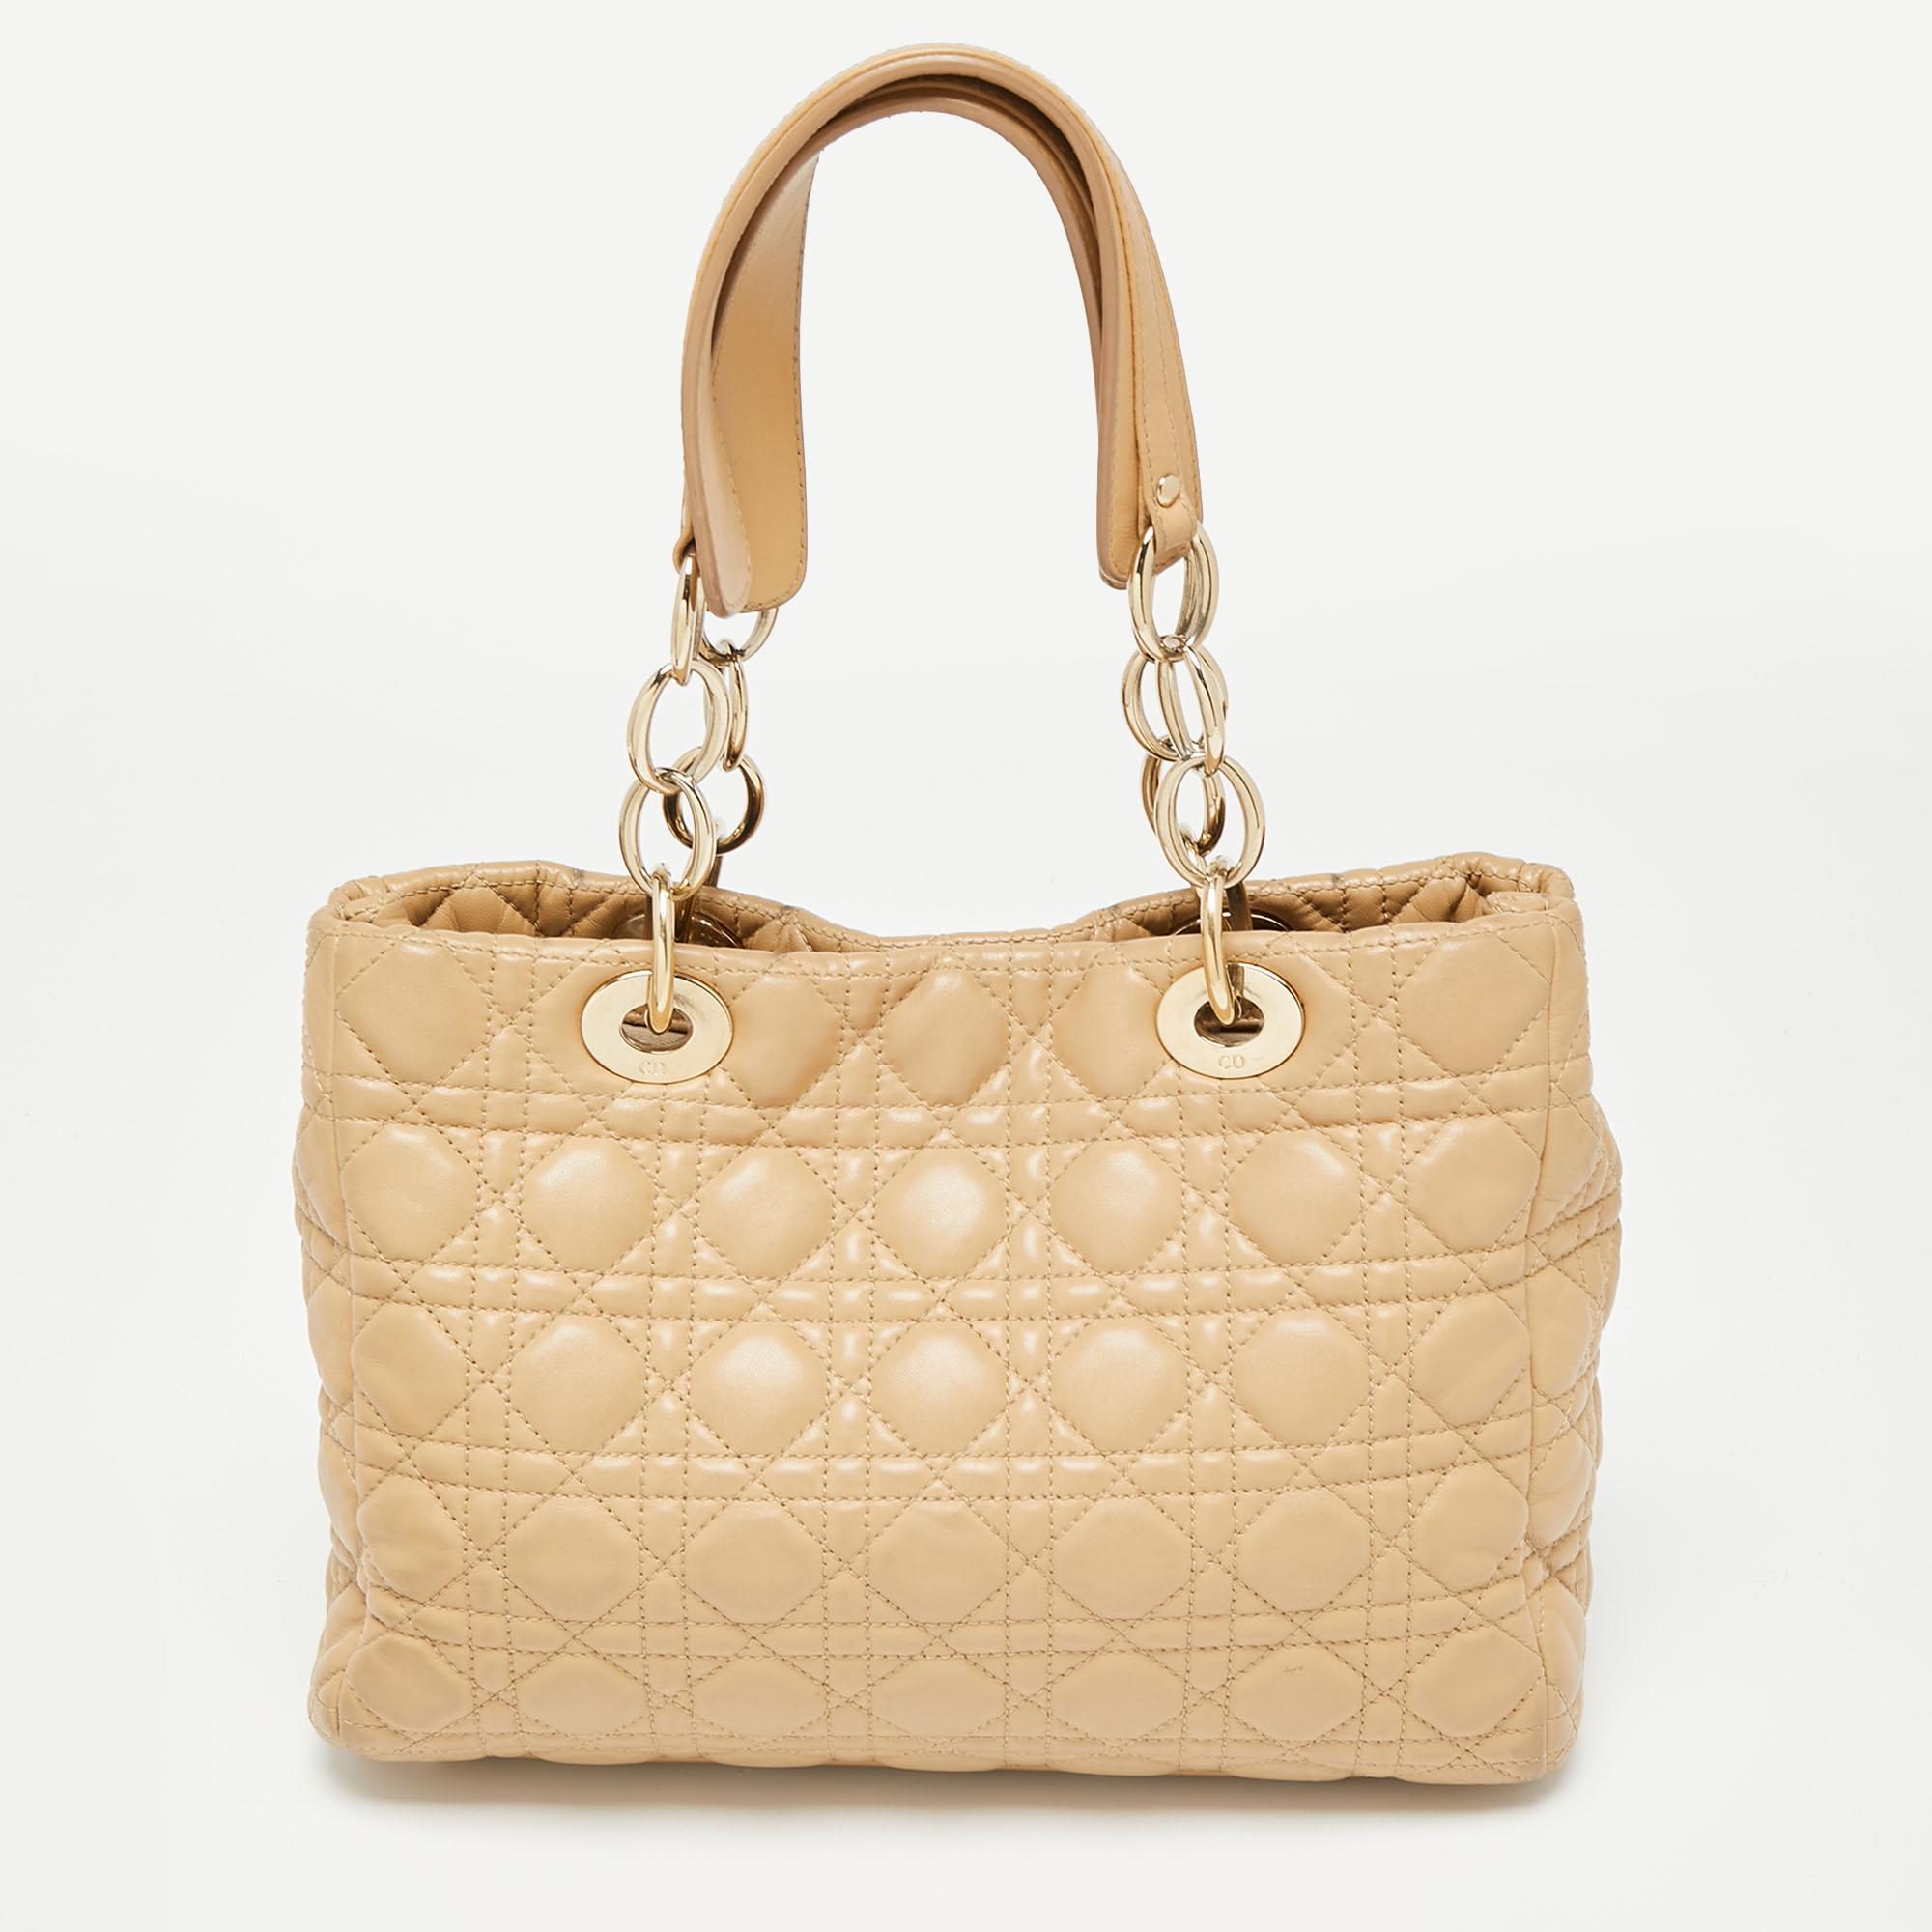 This Lady Dior tote is a Dior creation that has gained recognition worldwide and is today a coveted bag that every fashionista craves to possess. This soft tote has been crafted from leather, and it carries the signature Cannage quilt. It is